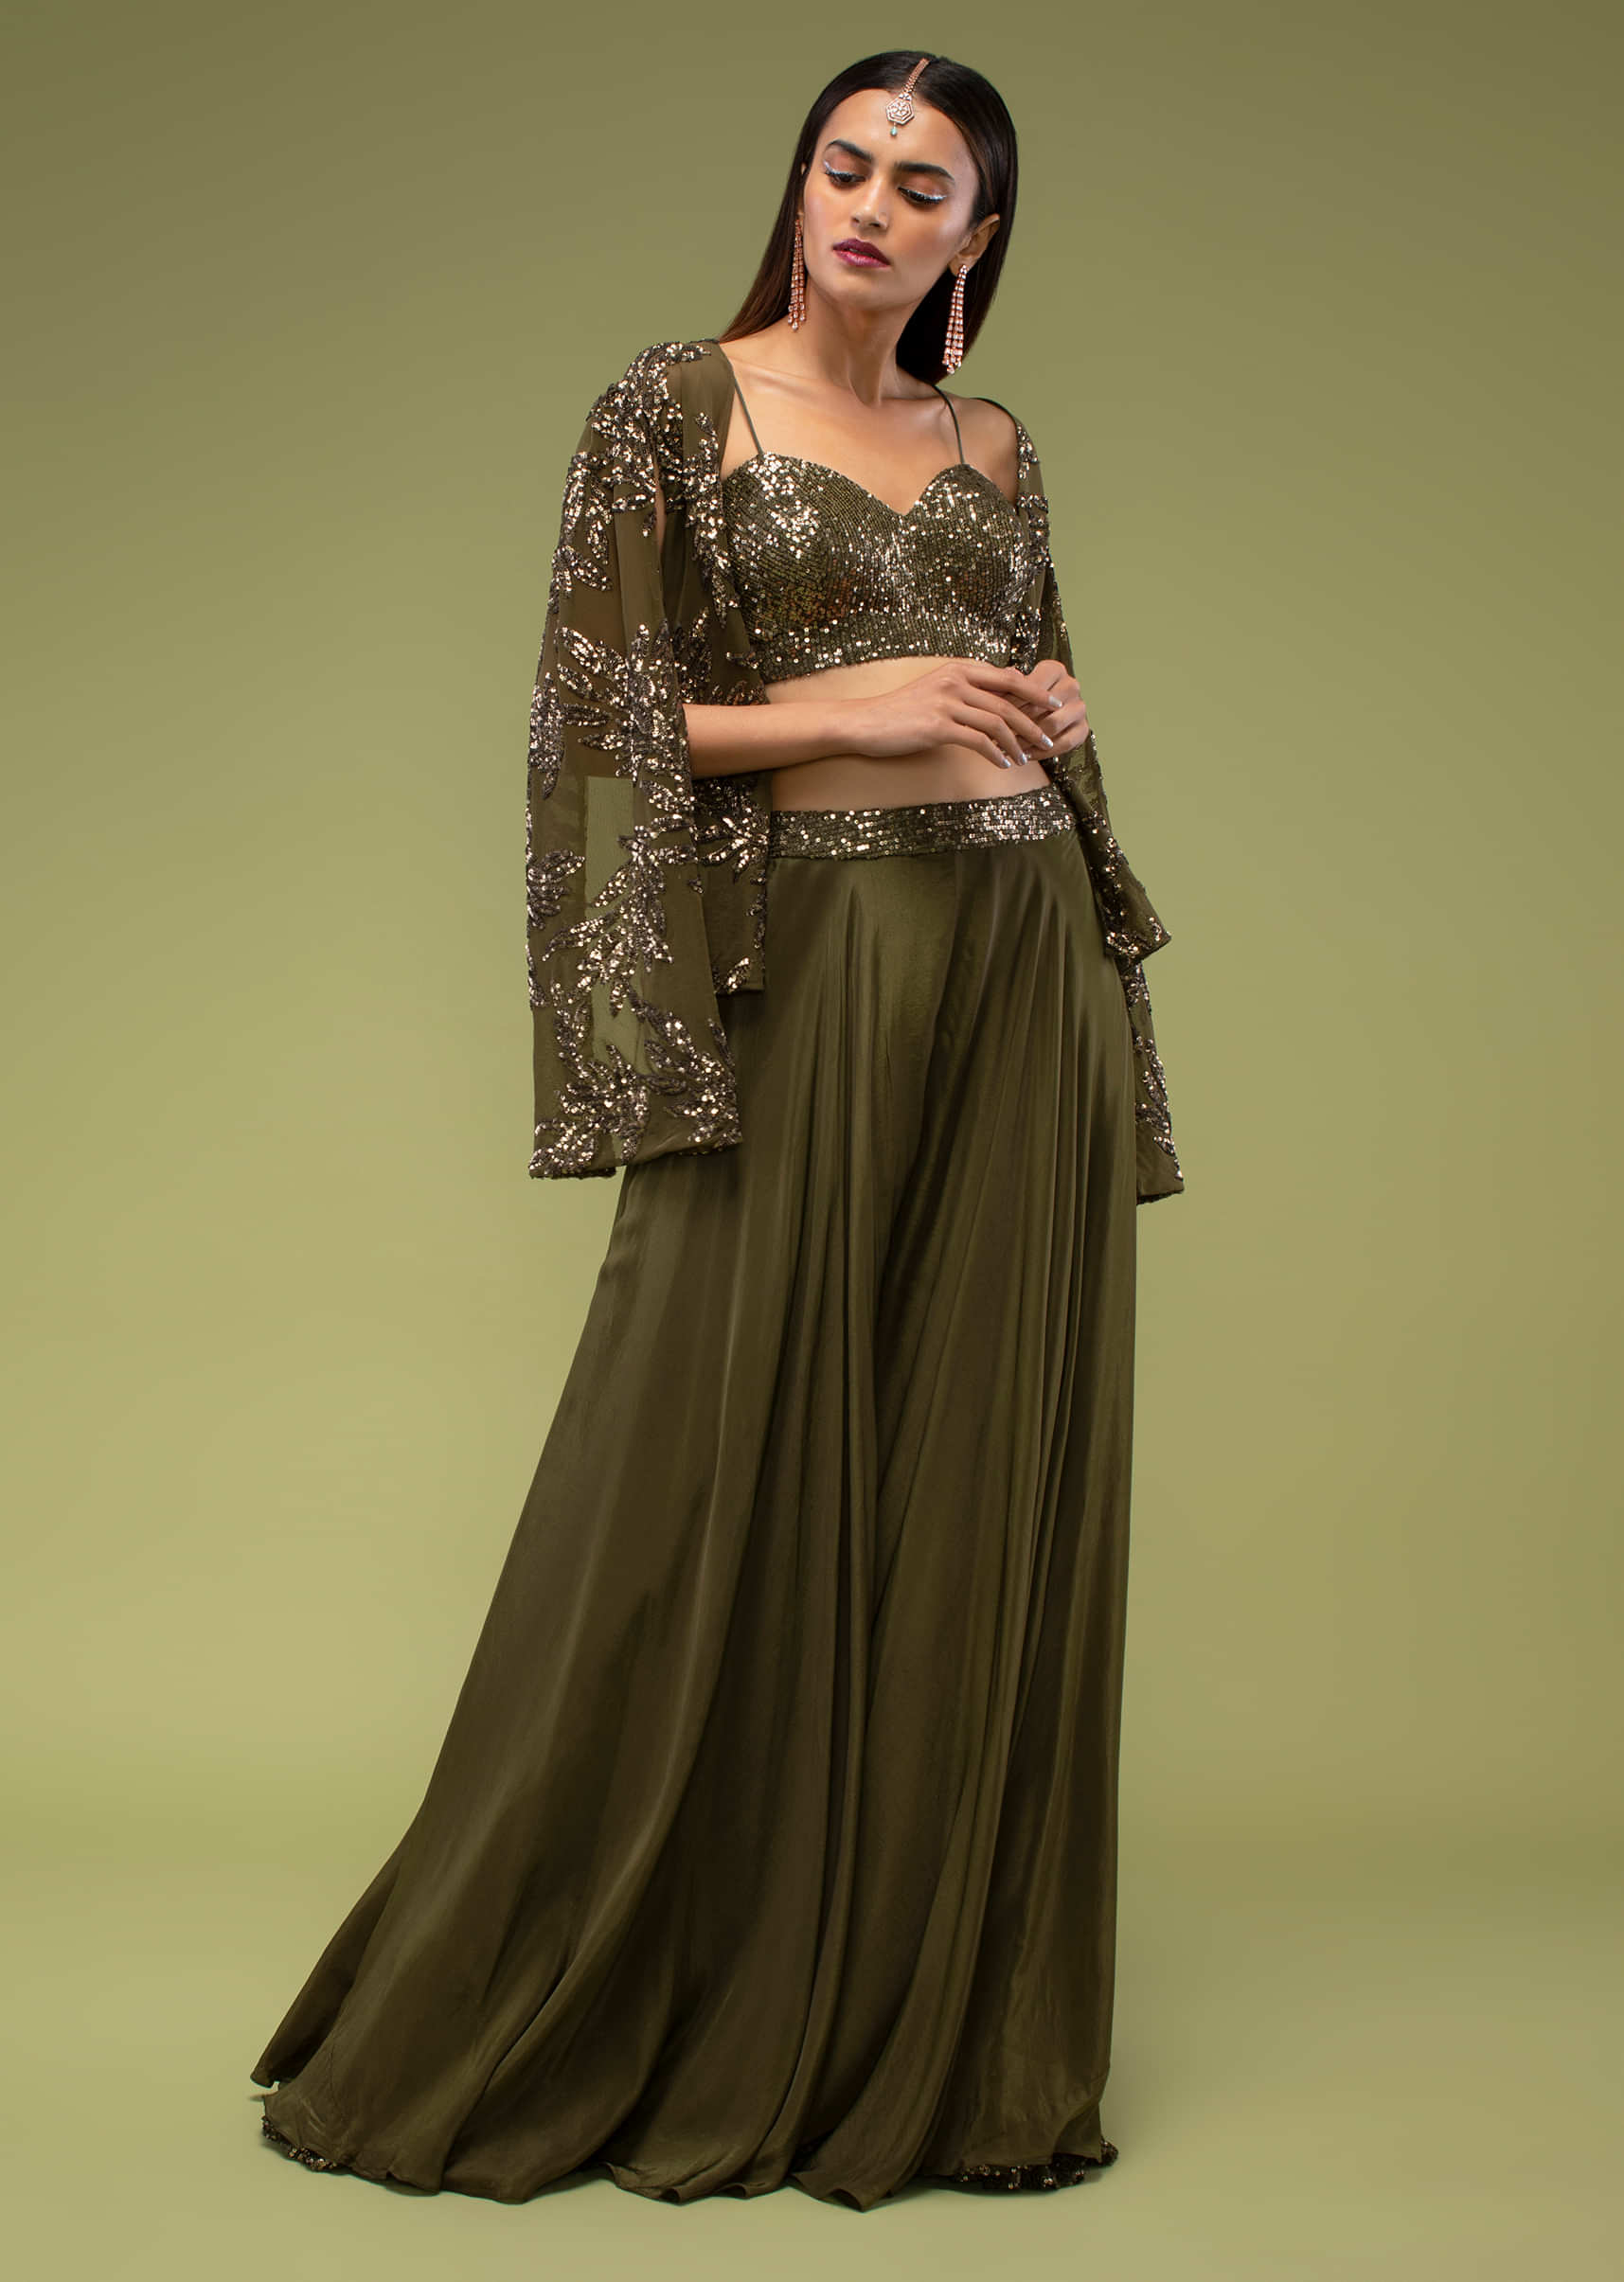 Military Olive Green Palazzo And A Crop Top Set, Paired With A Cape With Sequins Embroidery On It